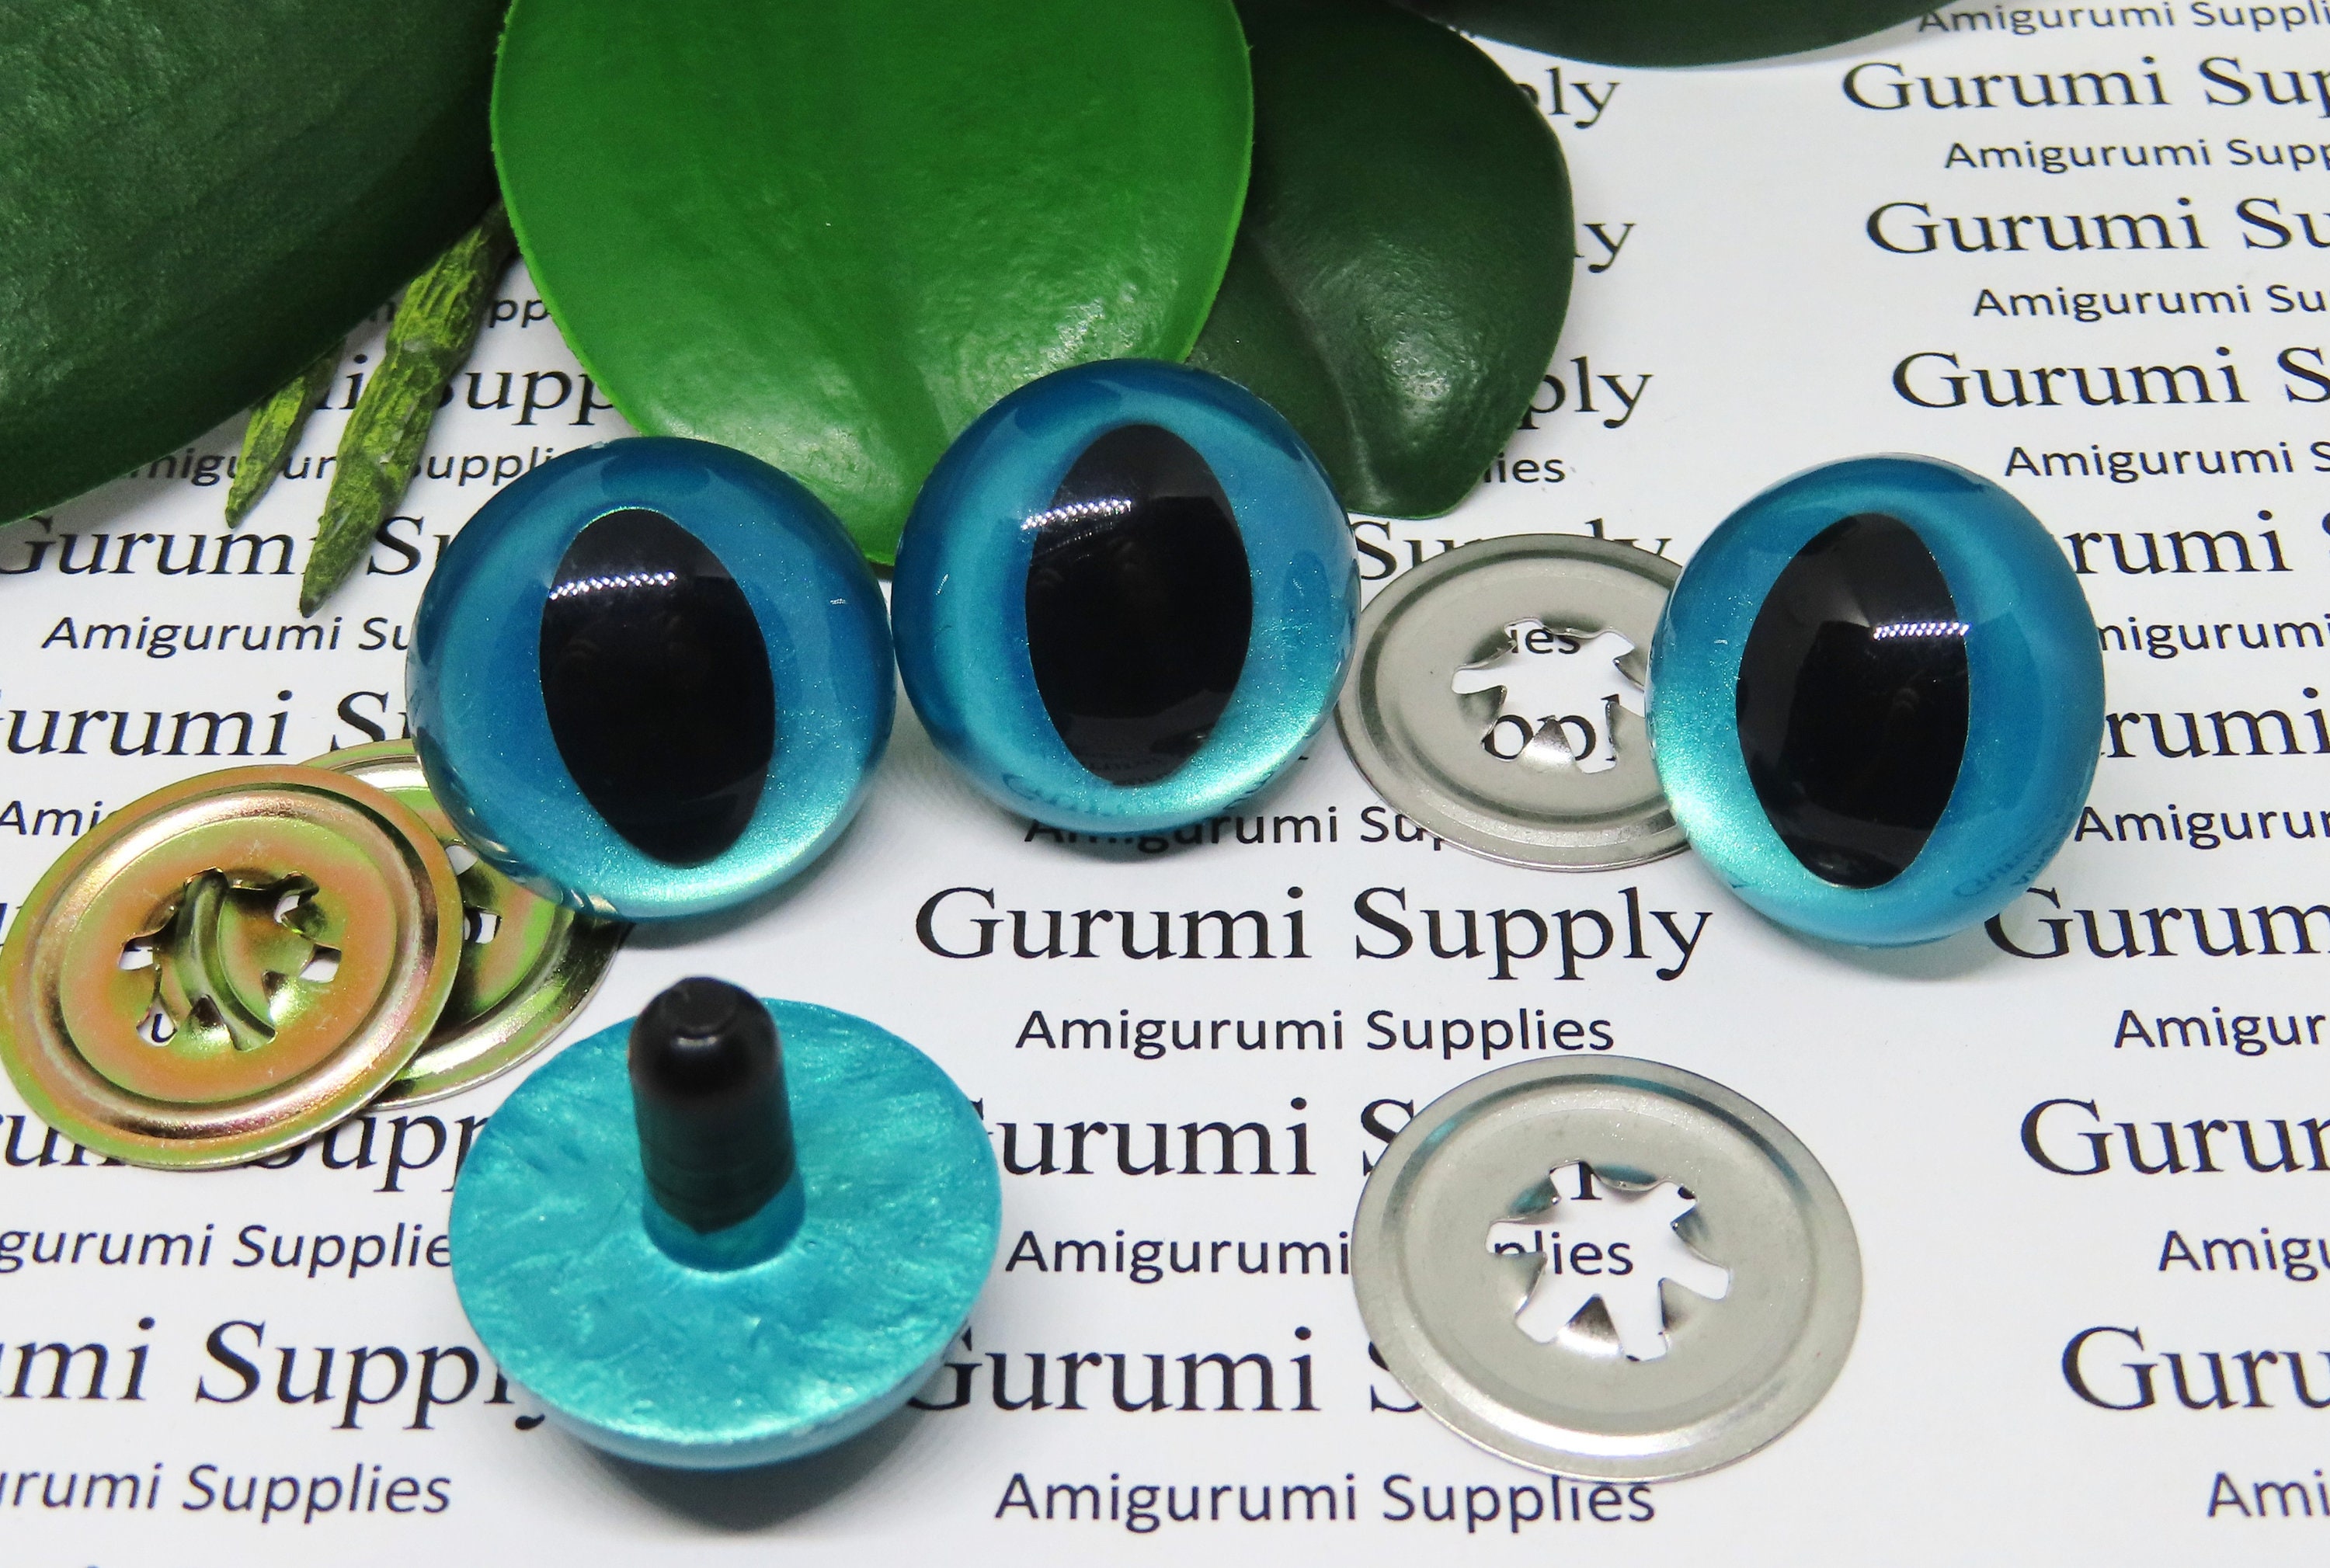 1 Pair 18mm Article WTM Plastic Safety Eyes Available in 12